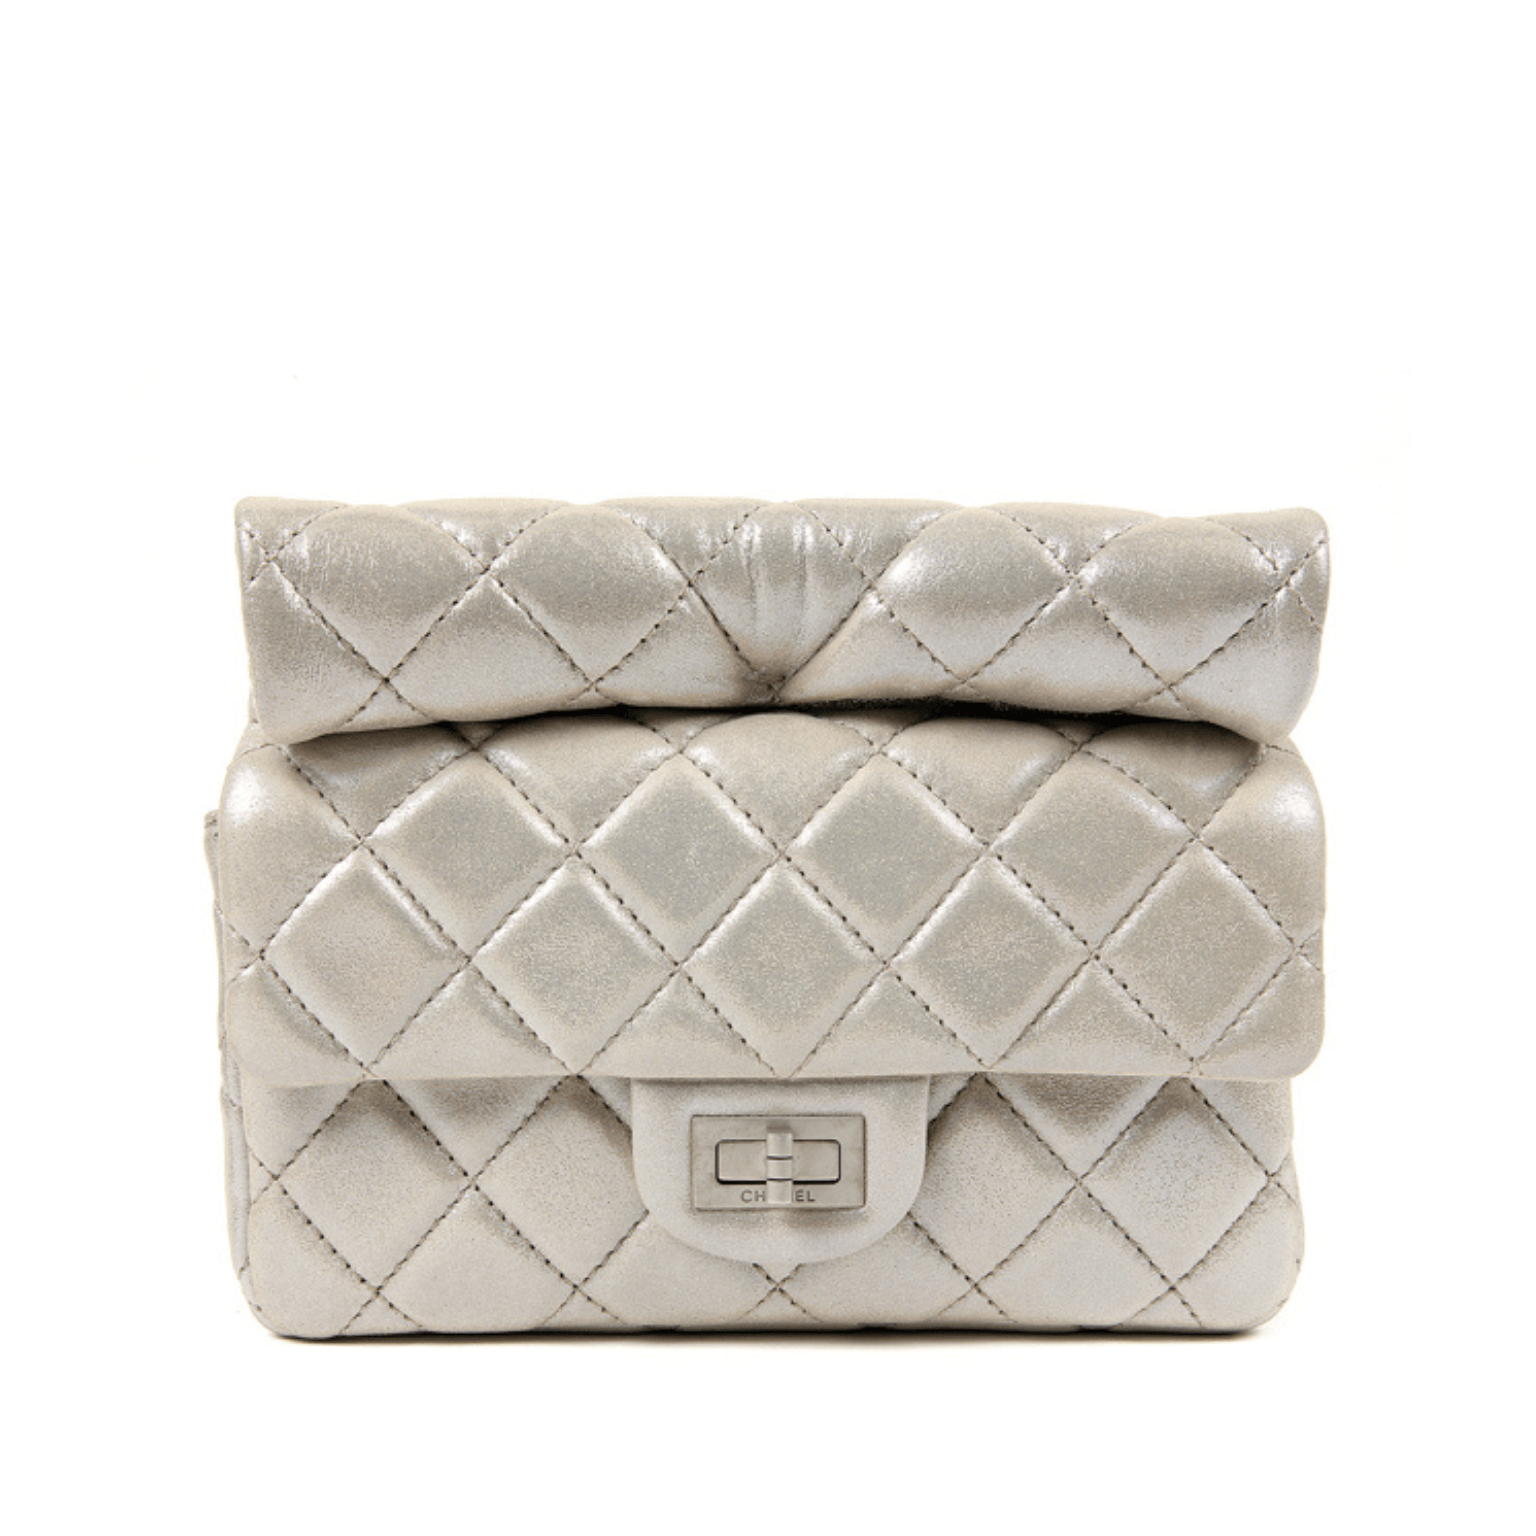 Chanel Silver Gold Leather Roll Handle Reissue Clutch – Only